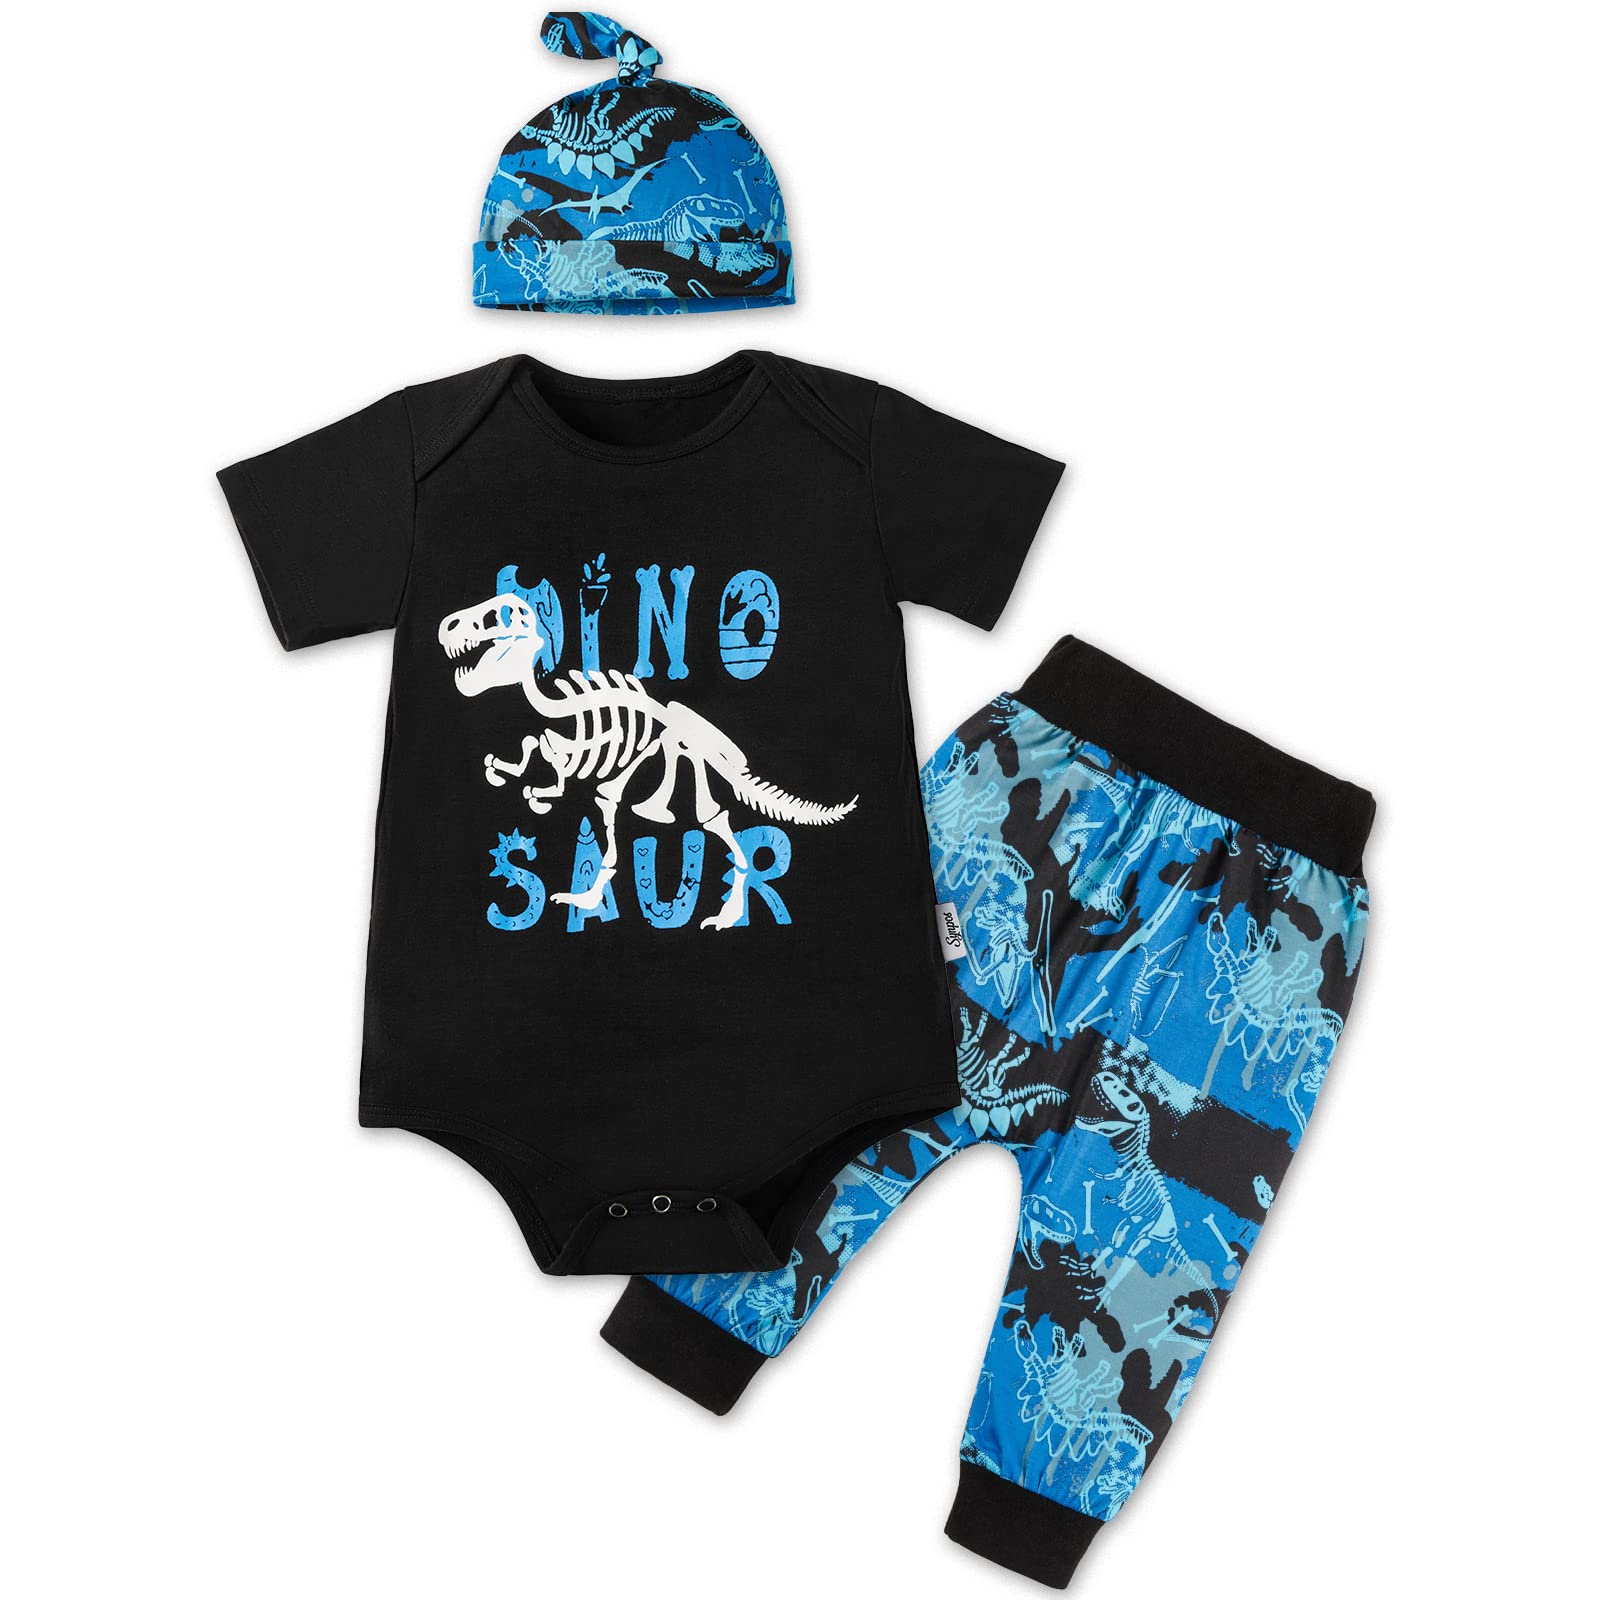 Synpos Baby Boy Outfit